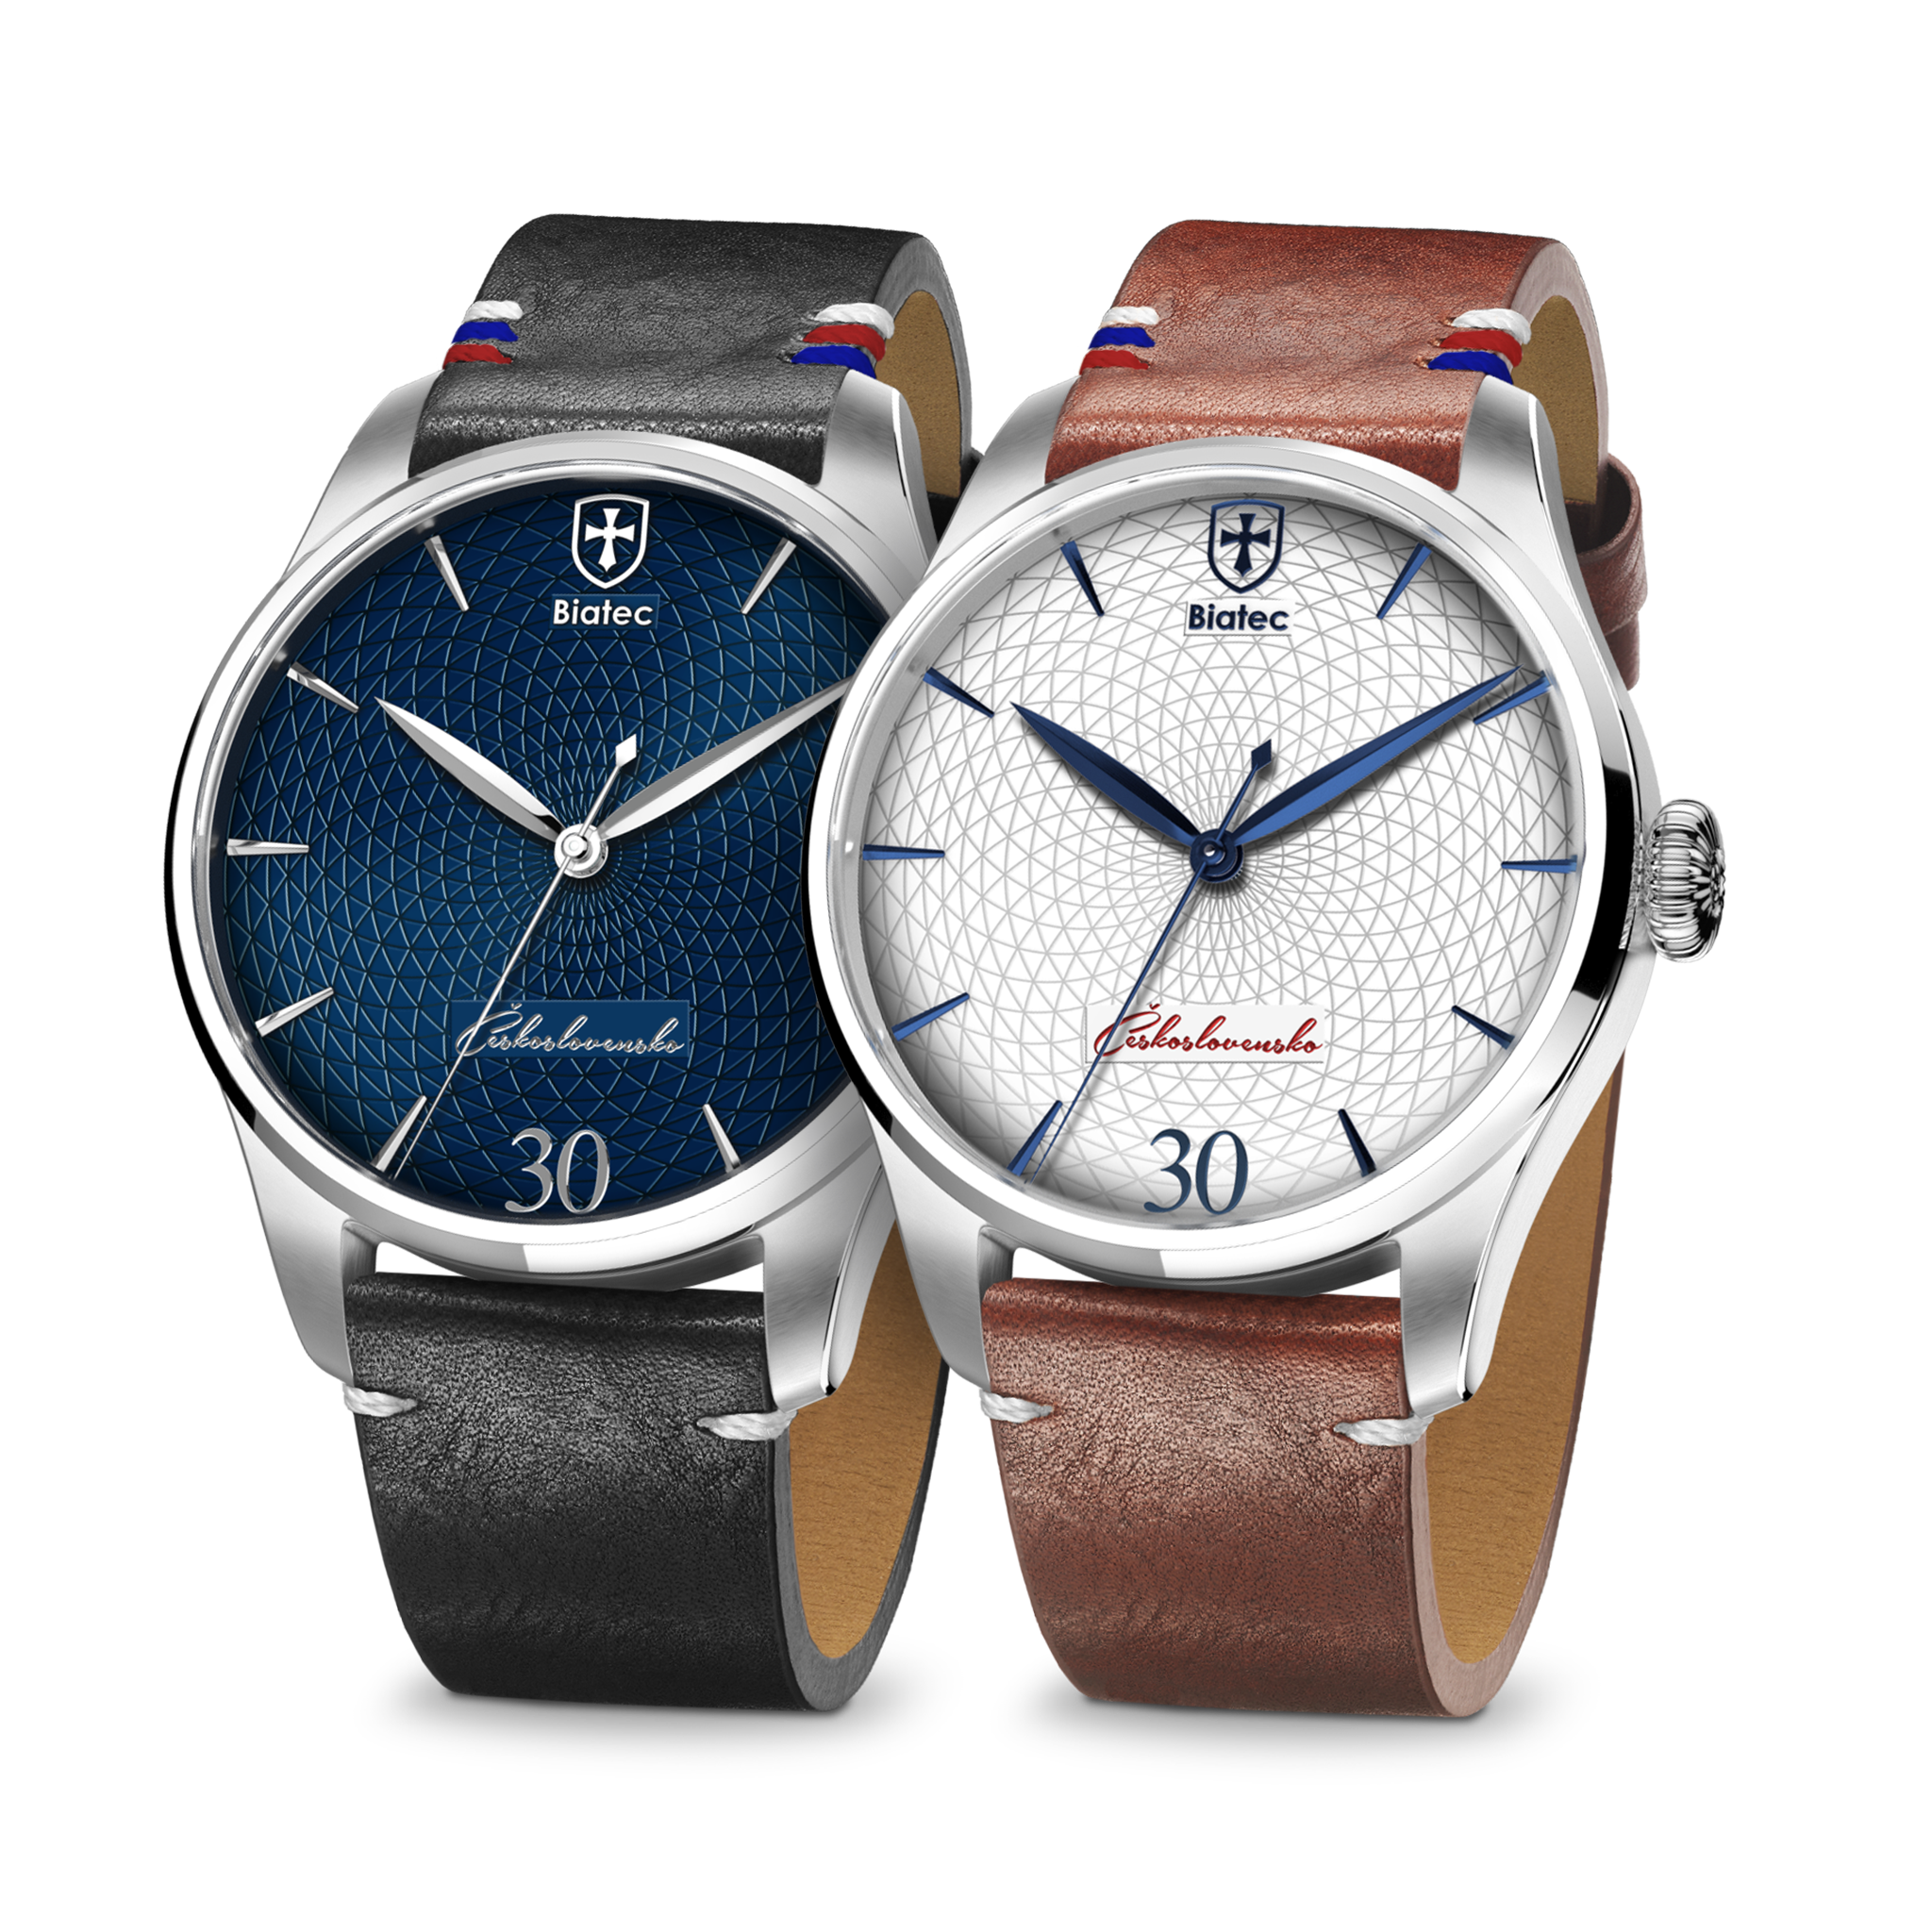 Biatec Helveti - Limited edition watches